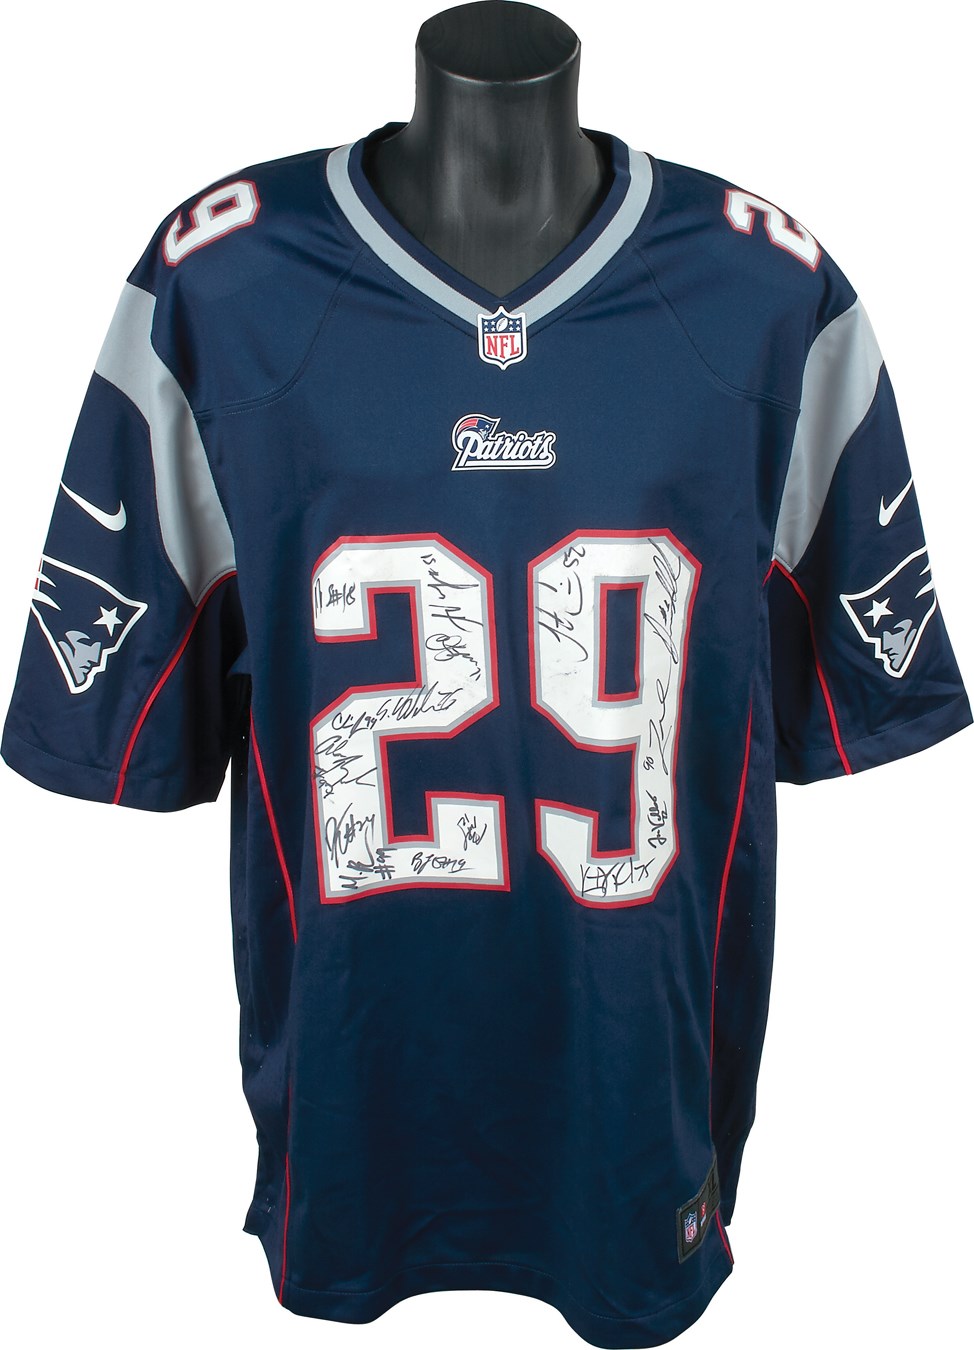 "Deflategate" Super Bowl XLIX Champion New England Patriots Team-Signed Jersey - Gifted to Longtime Team Employee (PSA)